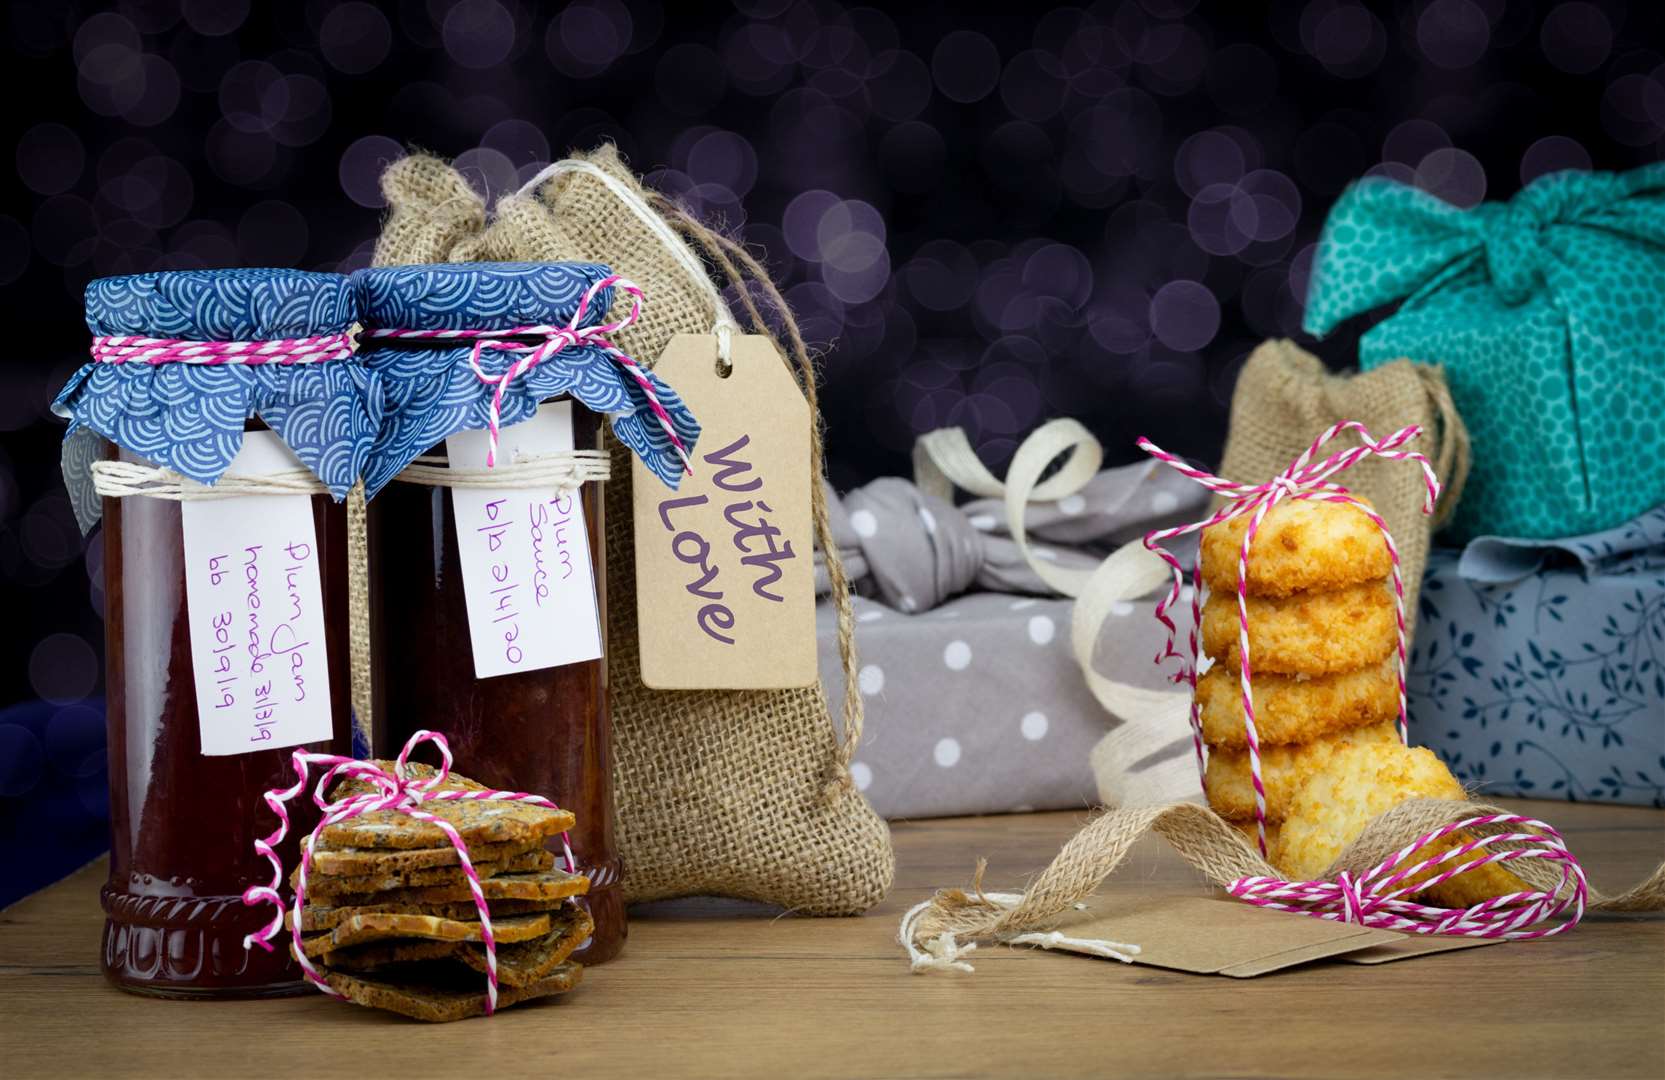 Homemade jams and baking make ideal gifts that don't cost the Earth.